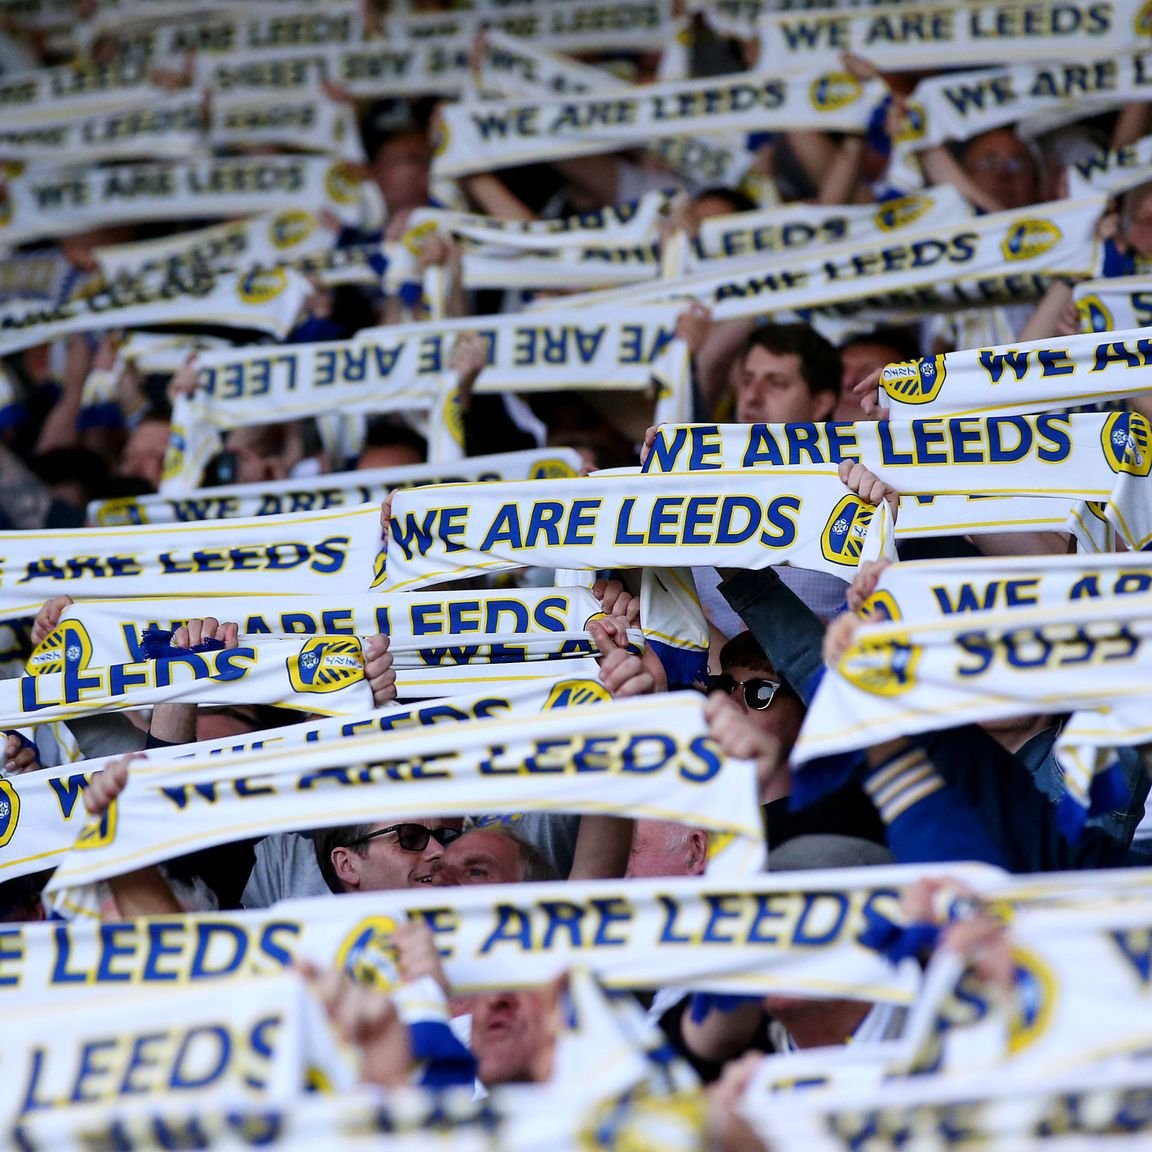 Let's stay positive, support our team, it's FAR from over! MOT, ALAW.